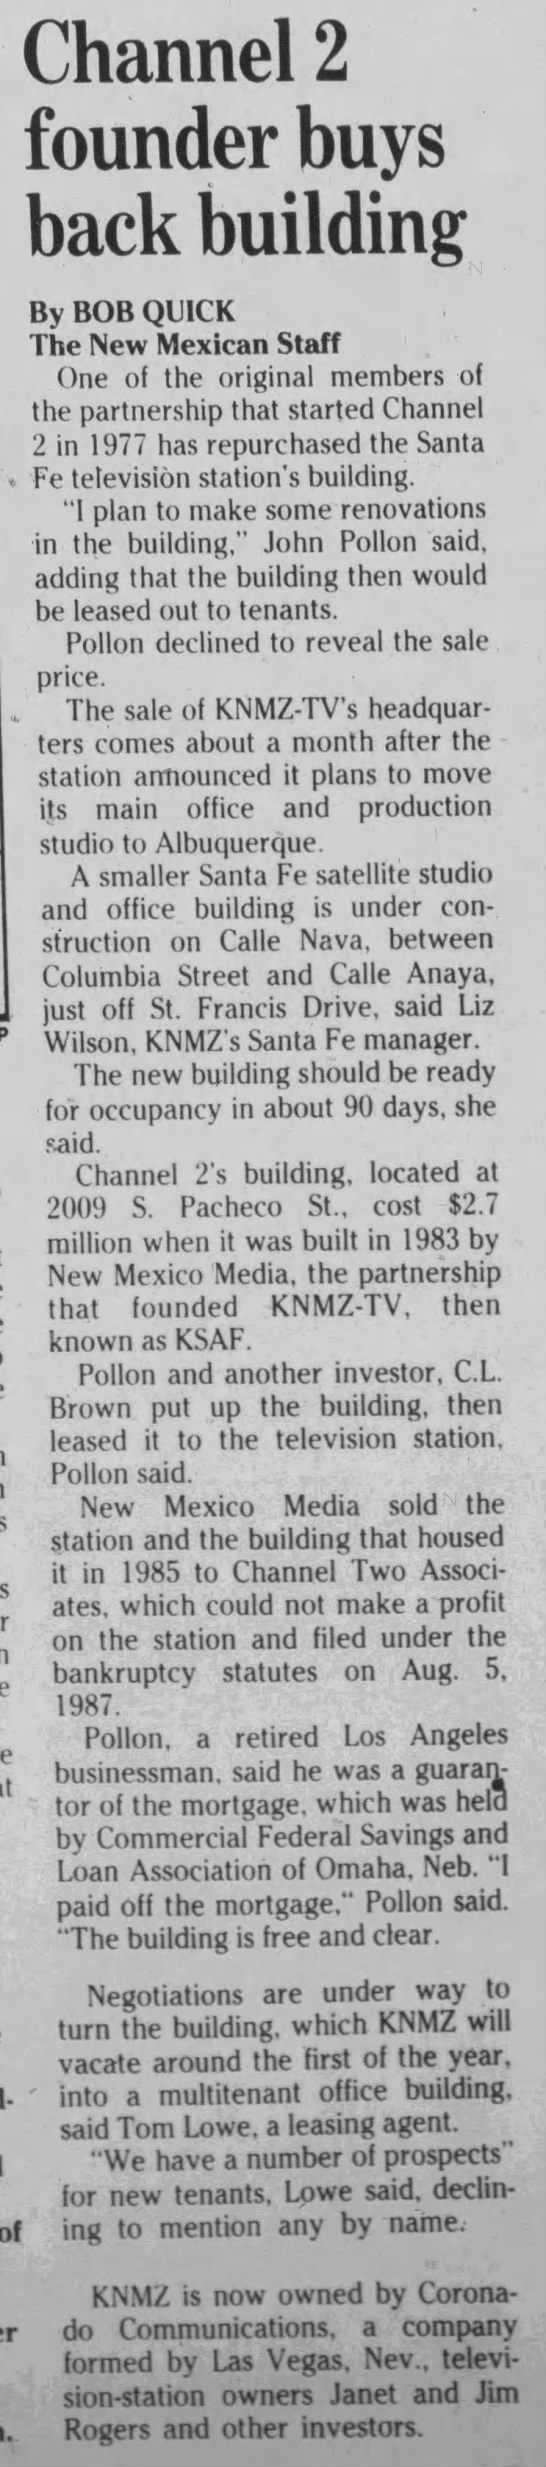 Channel 2 founder buys back building - 